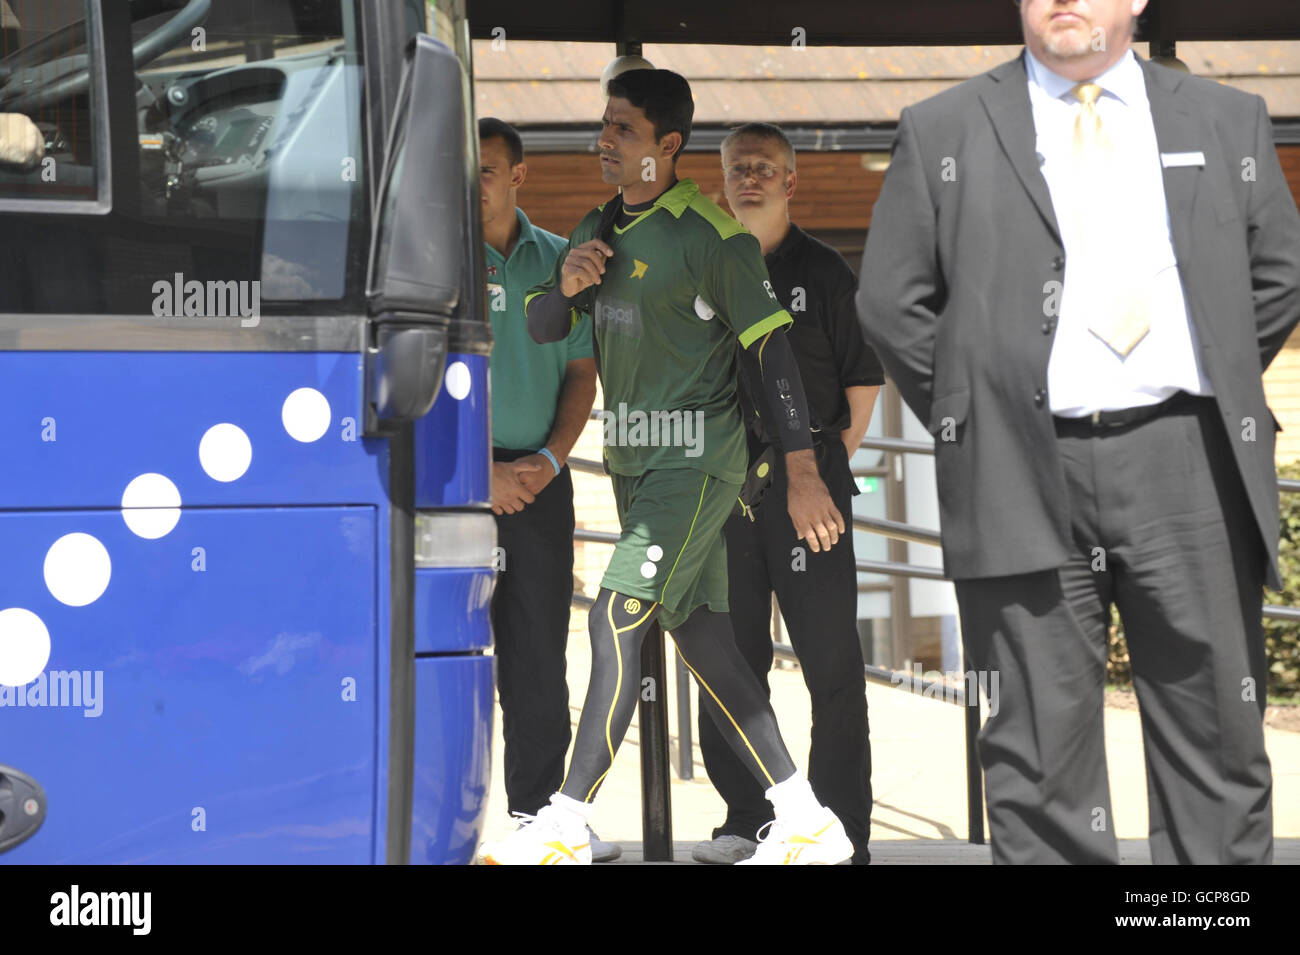 Pakistan cricketer Abdul Razzaq leaves the team's hotel in Taunton, Somerset. He declined to comment directly on the betting scam allegations made against his team, but told Sky Sports News: 'We will try to get the team up again and make sure that we deliver the best we can in the next few games, that's all I can do. Stock Photo